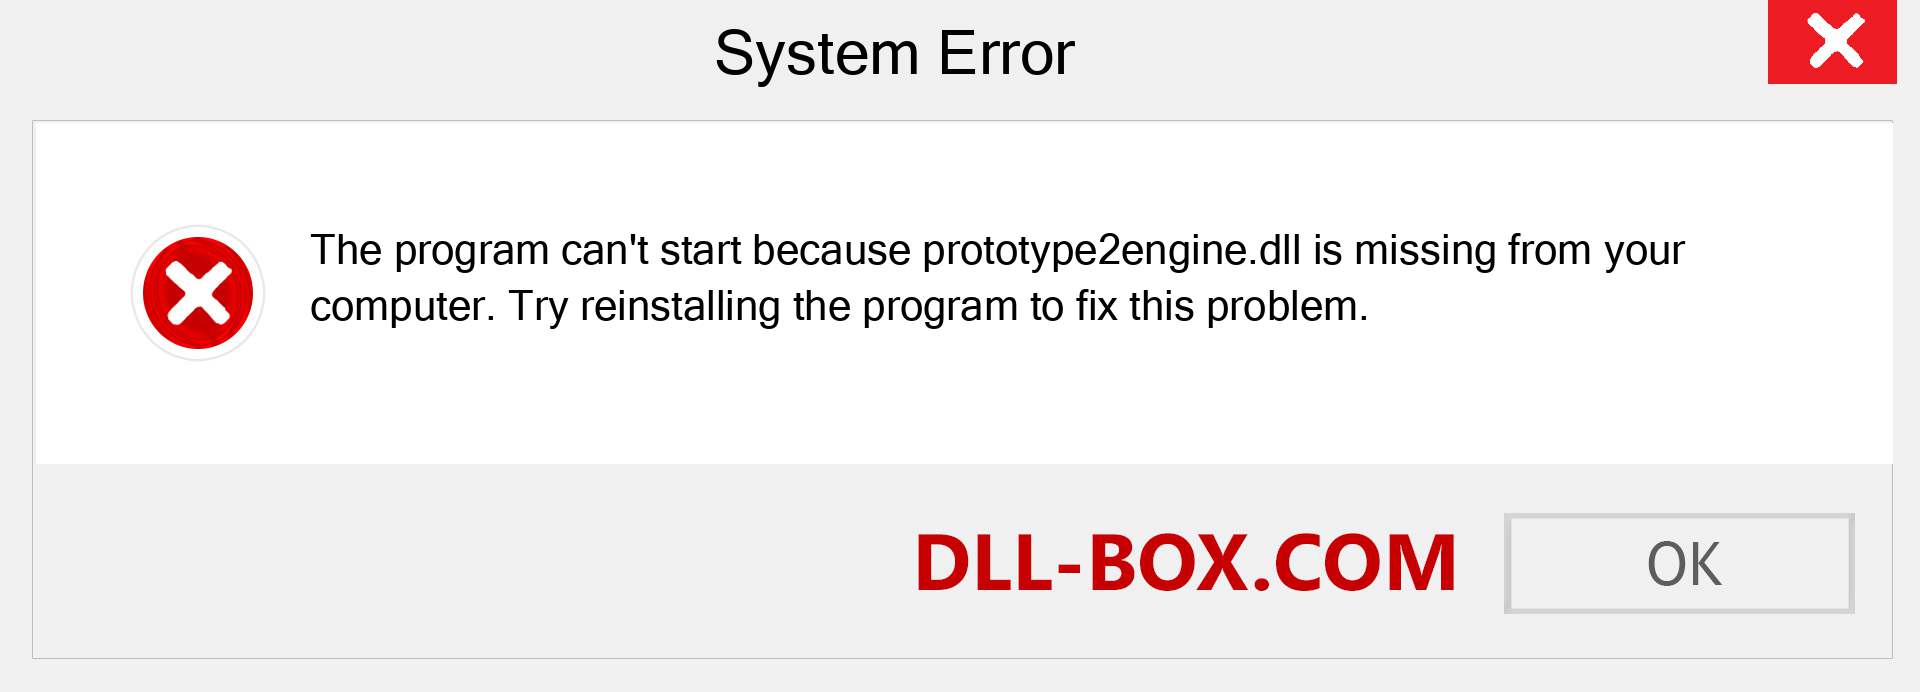  prototype2engine.dll file is missing?. Download for Windows 7, 8, 10 - Fix  prototype2engine dll Missing Error on Windows, photos, images